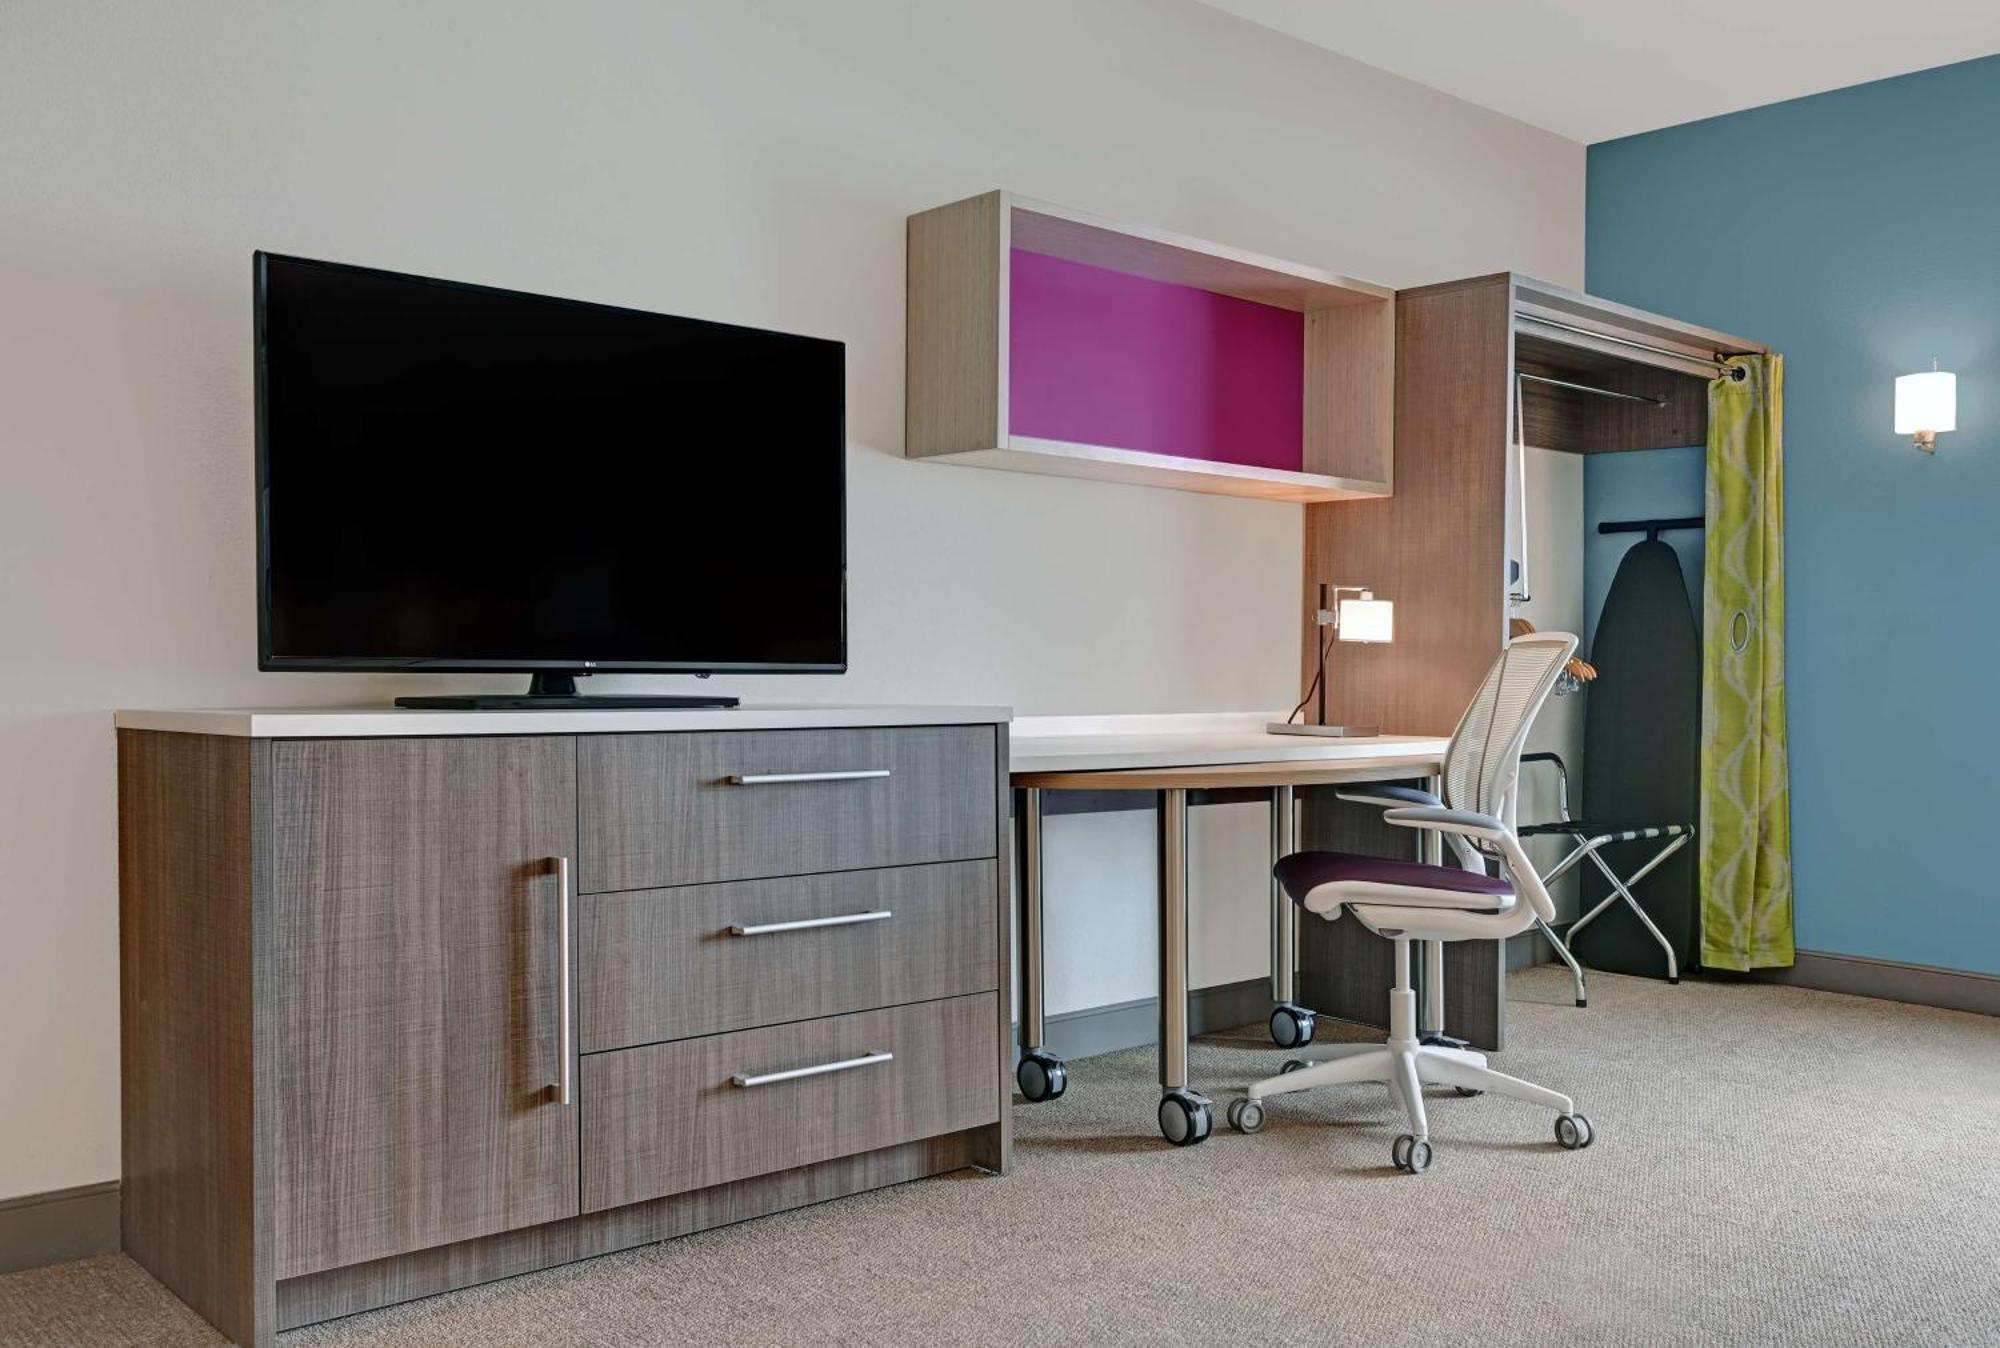 Home2 Suites By Hilton Tracy, Ca ภายนอก รูปภาพ